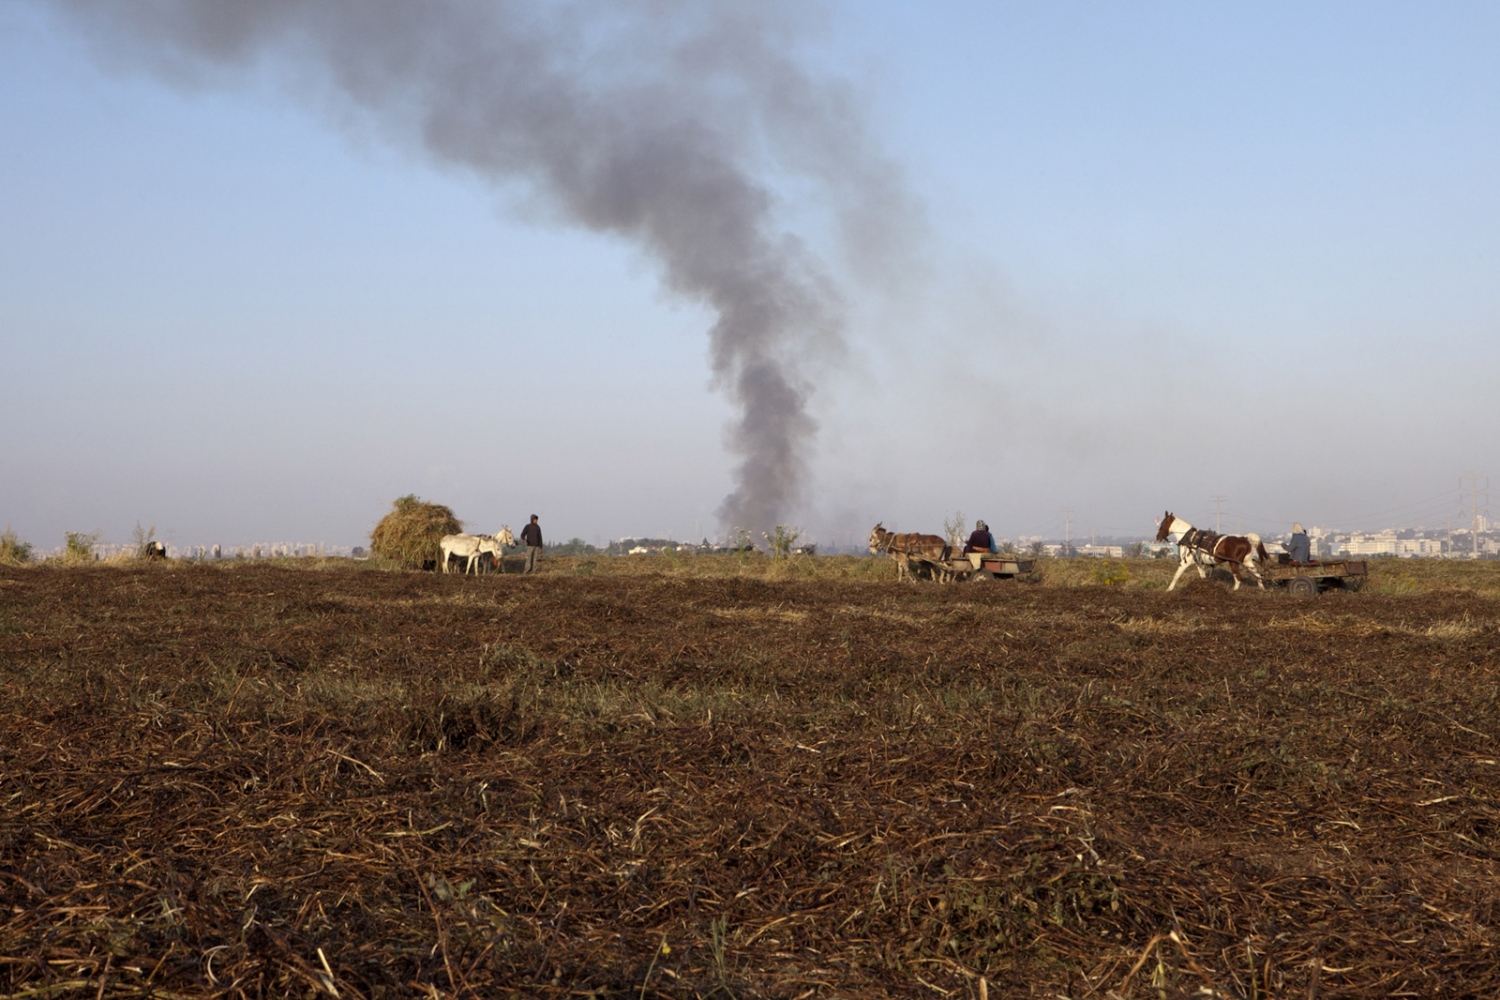  A fire burns beyond a field, as Palestinian farmers cross the invisible line, that pases in the middle of the field, to gather grass for their donkeys. Viewed from the Green Line looking back into Israel. 